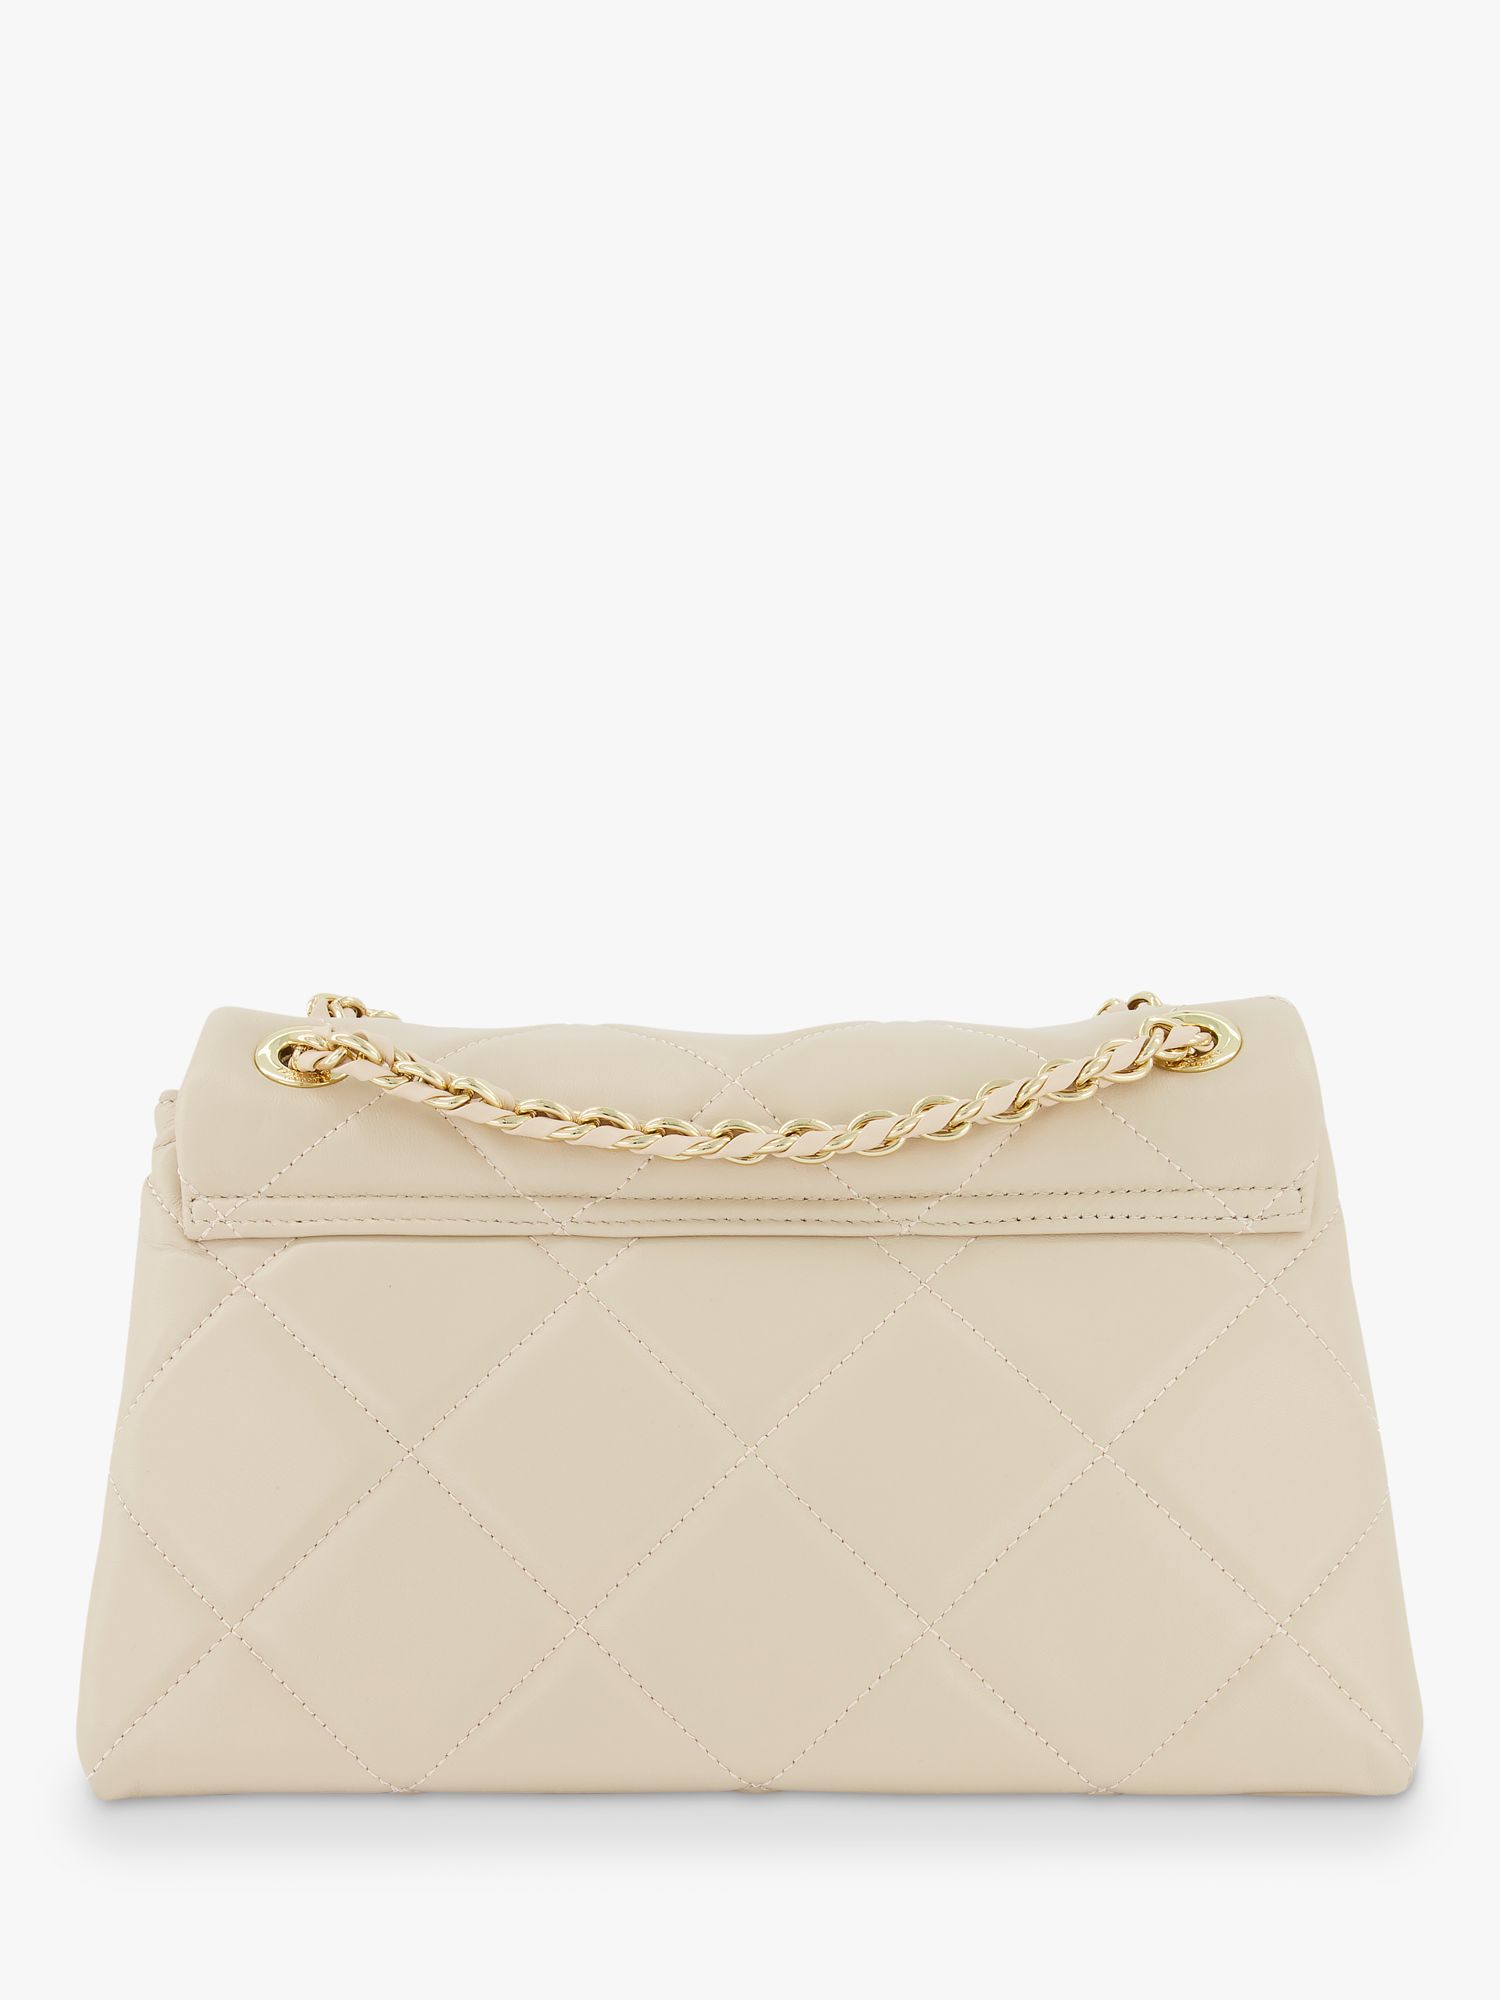 Dune Duchess Large Quilted Leather Shoulder Bag, Cream at John Lewis ...